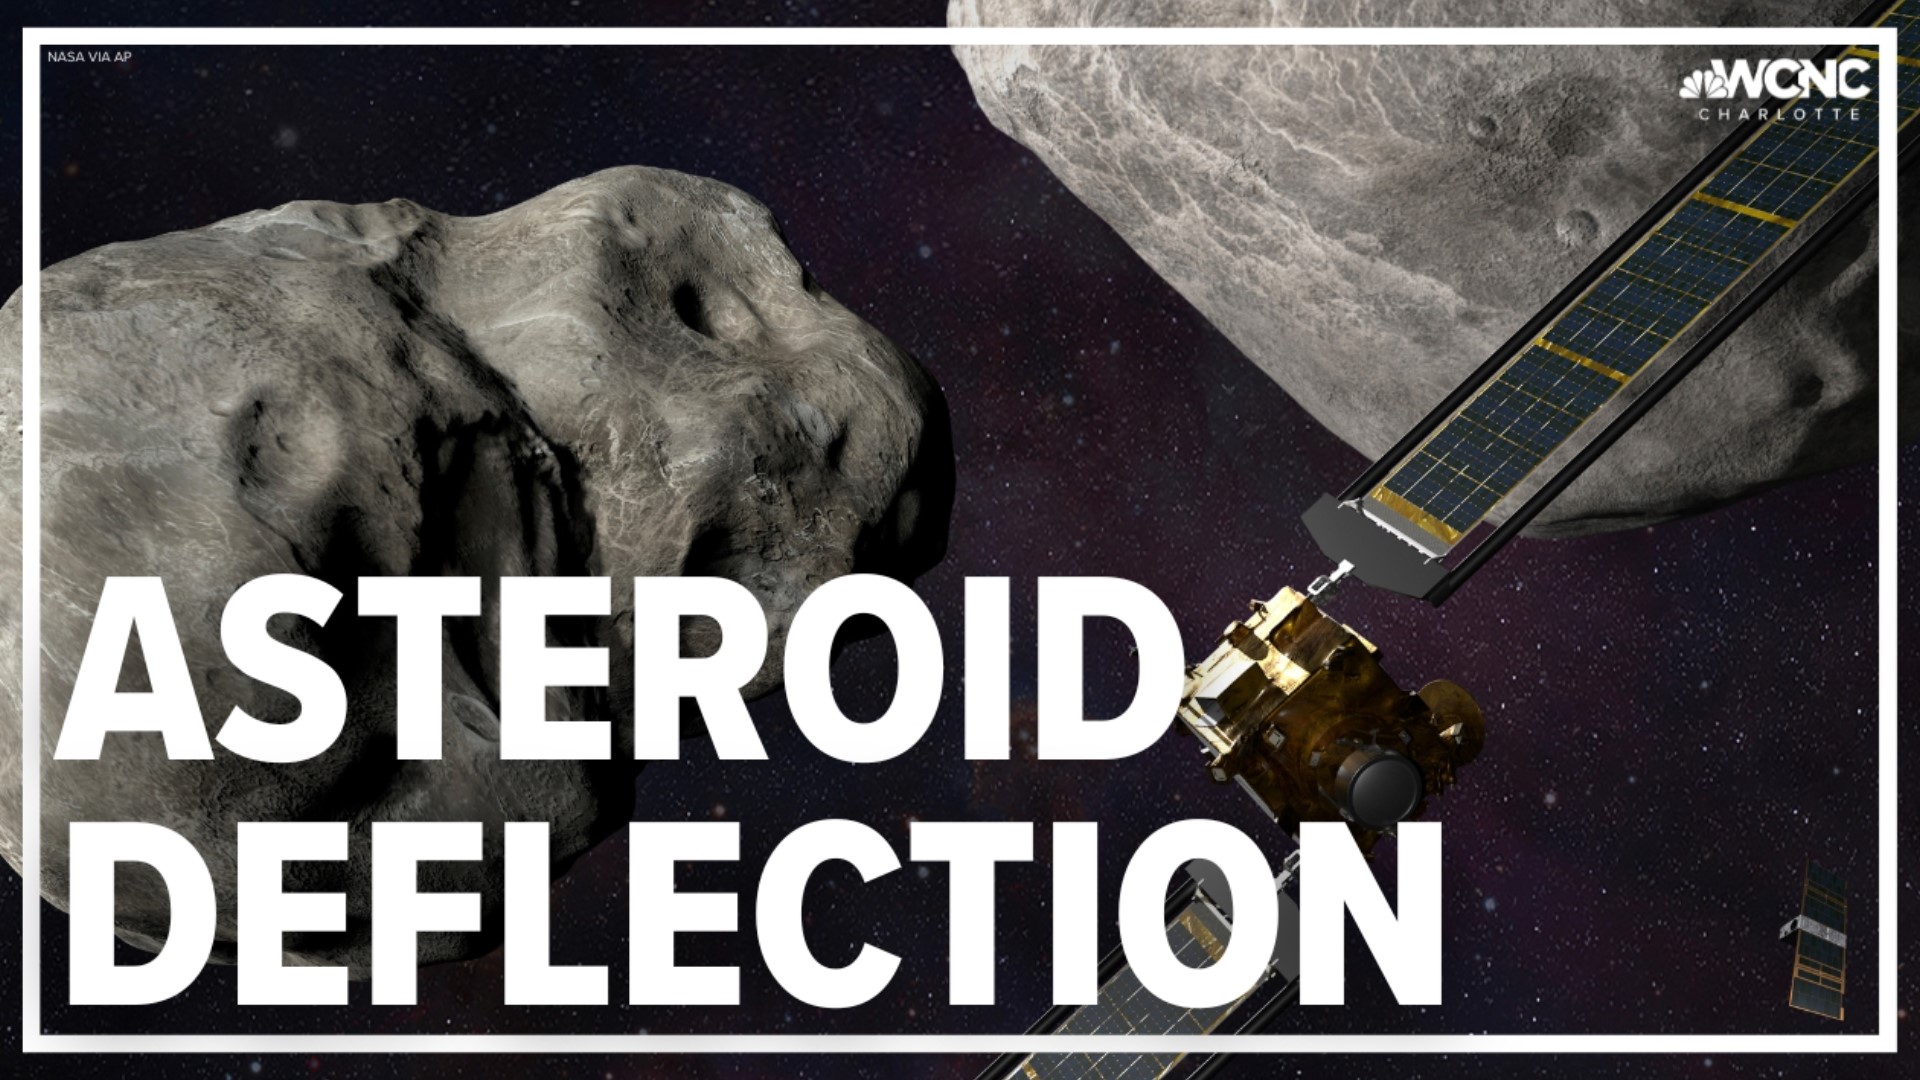 A NASA spacecraft is moving full steam ahead to hit an asteroid in the name of science.